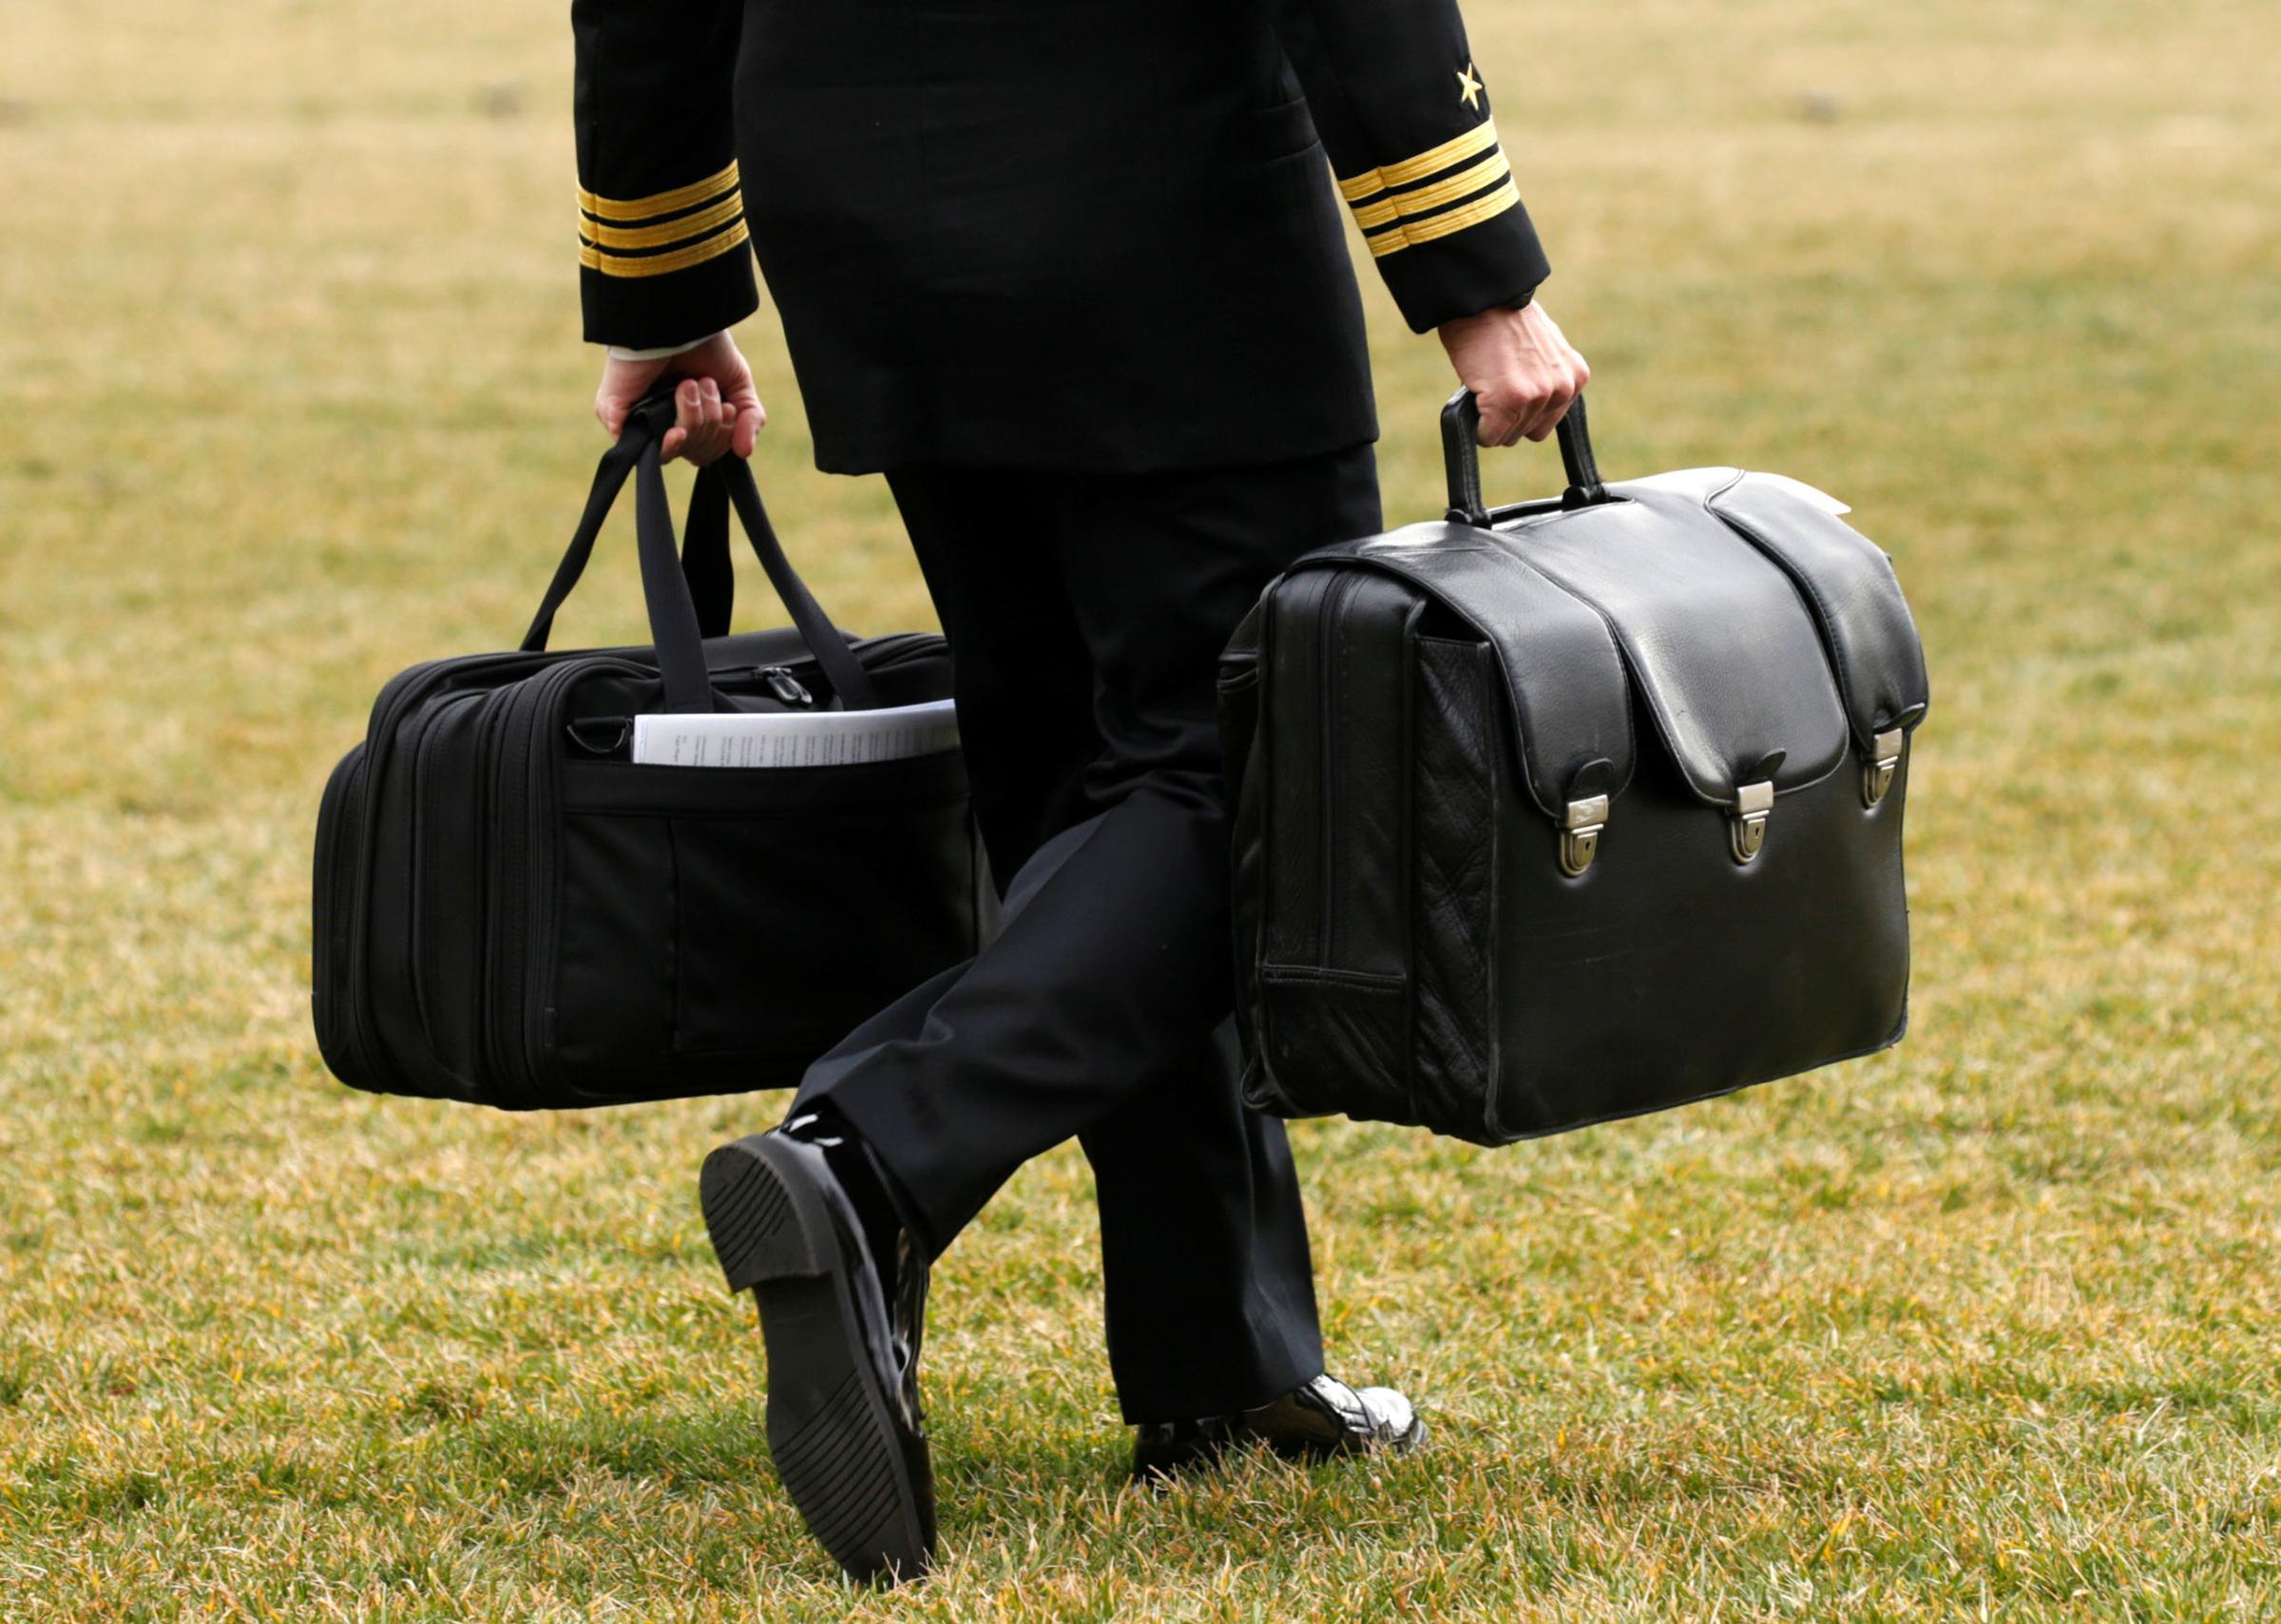 A military aide carries the "football" as Trump departs the White House in Washington